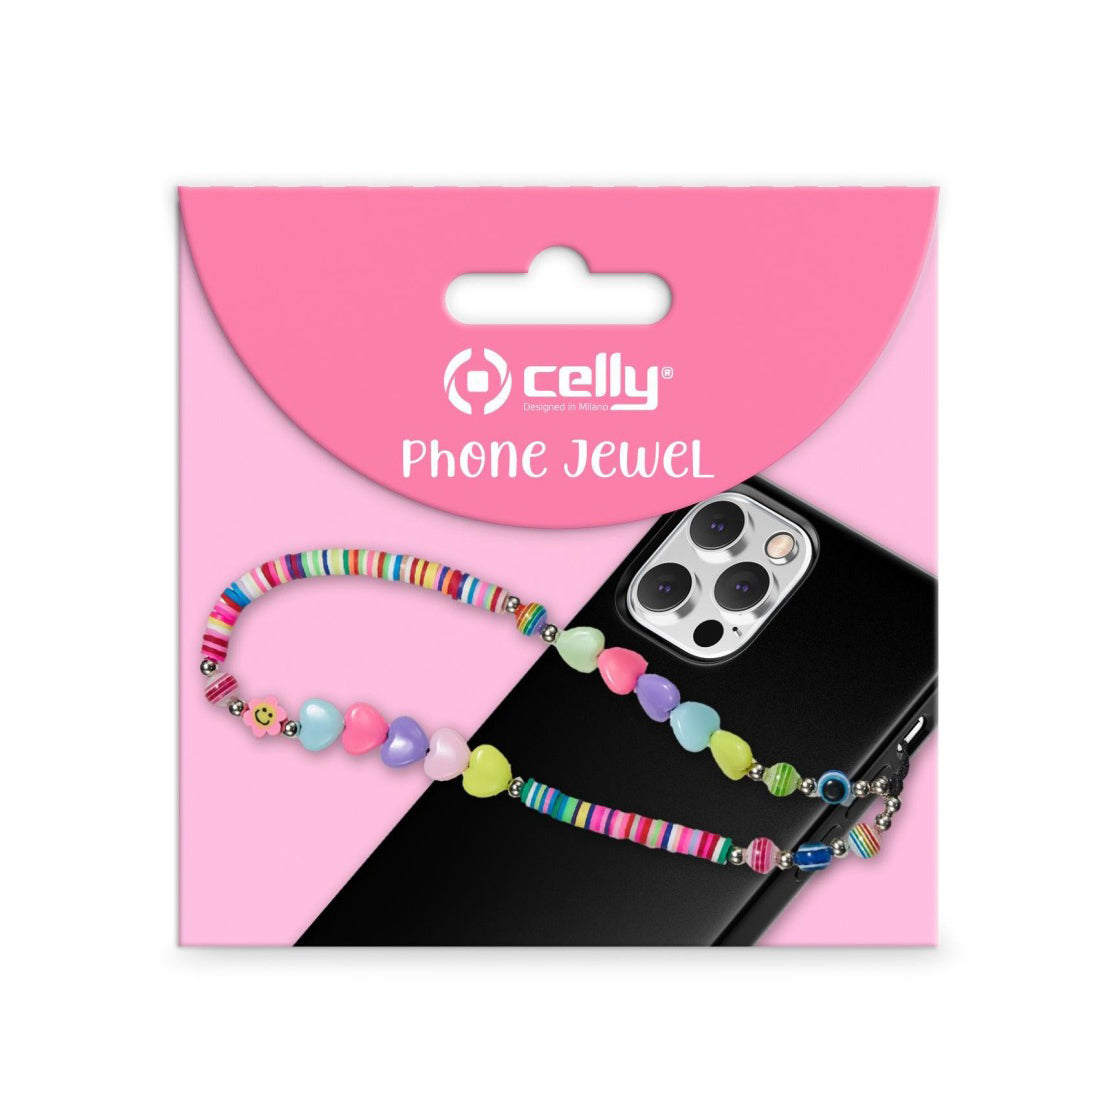 Celly Mobile Jewel